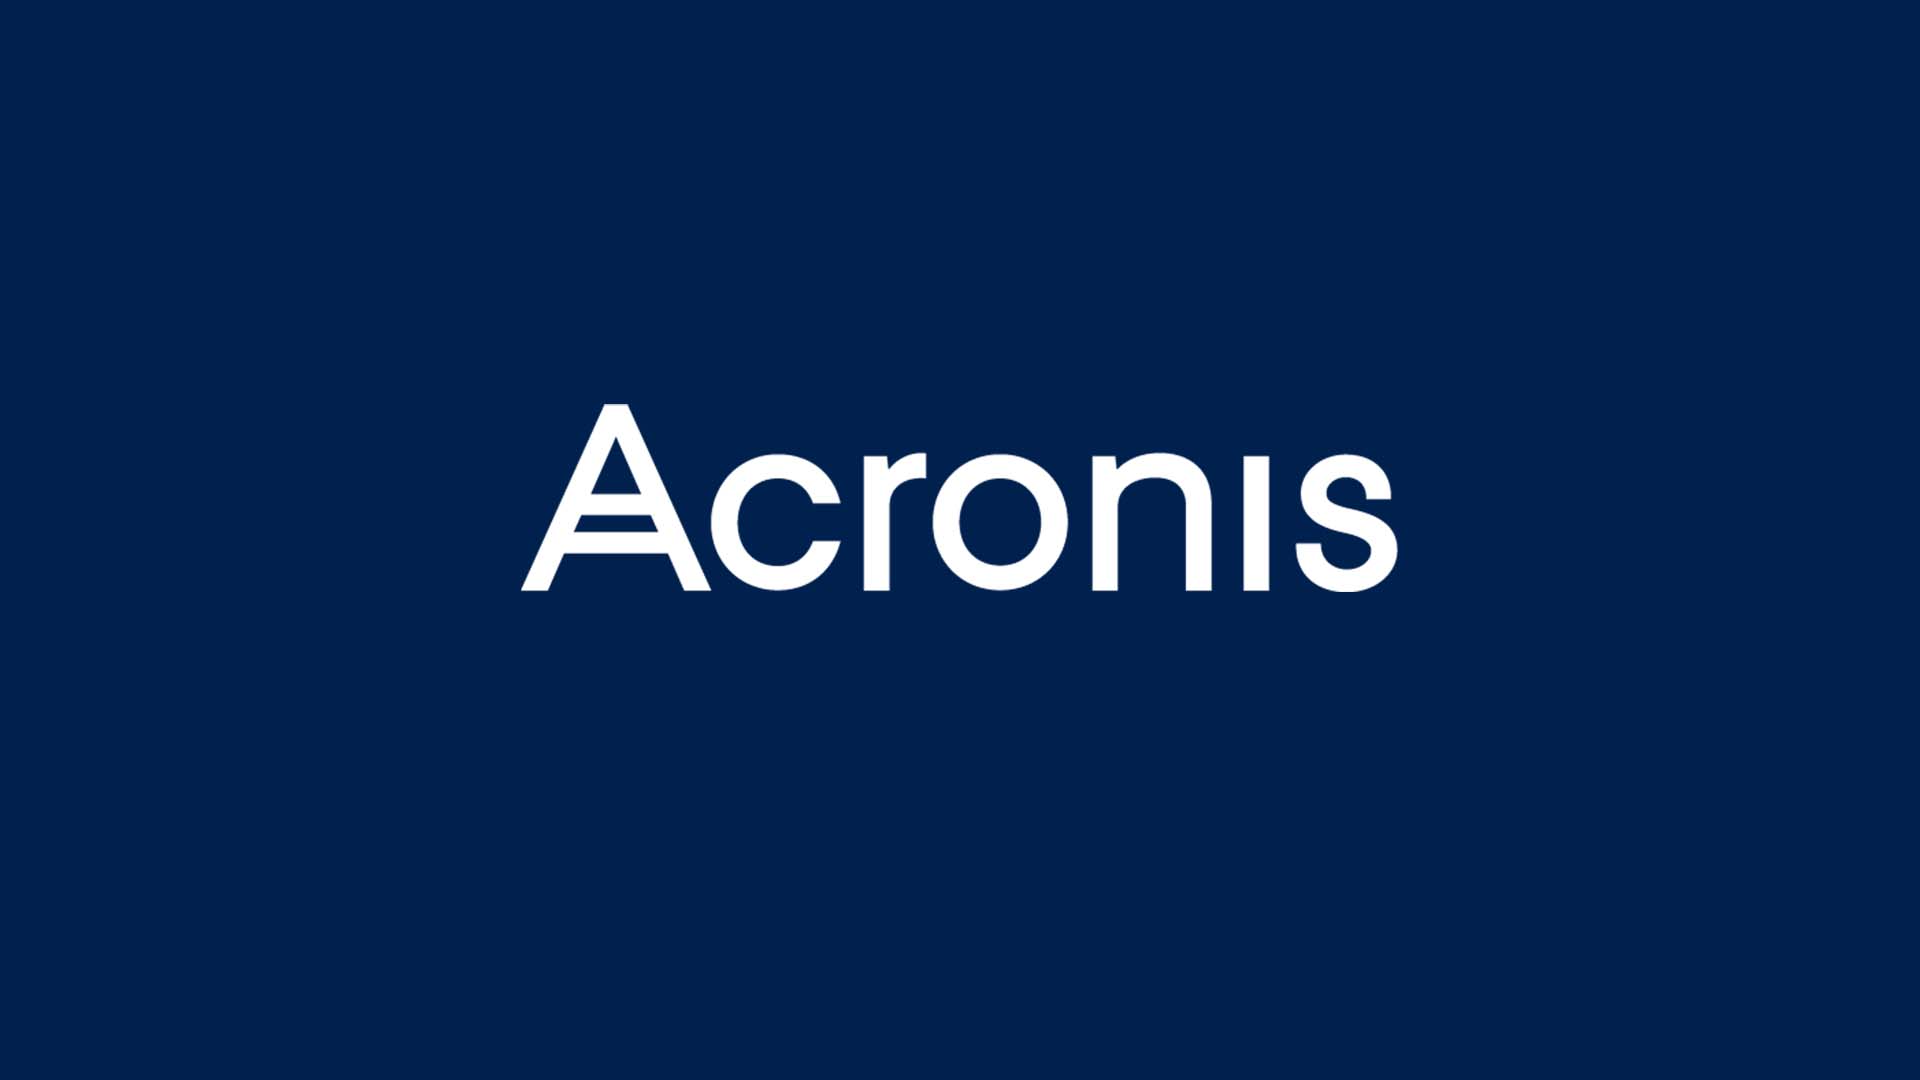 4 Methods to Install Acronis Agent on Linux